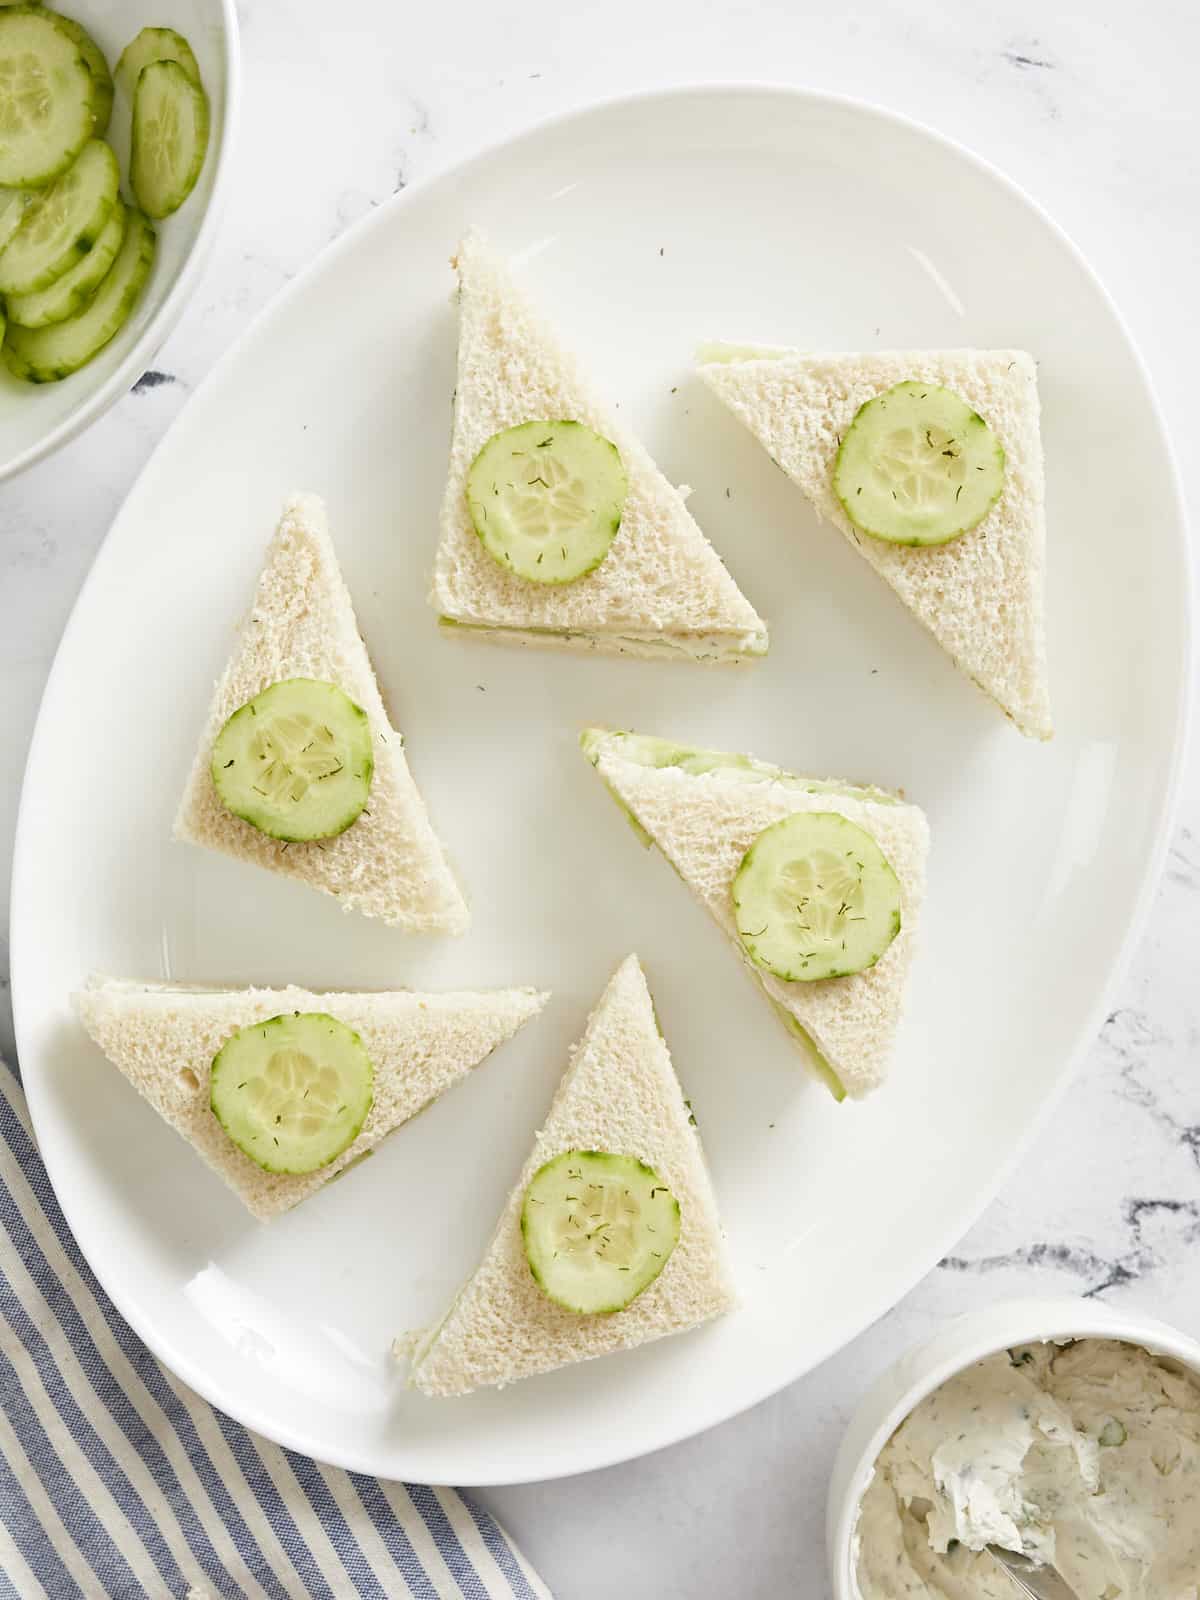 Overhead view of cucumber sandwiches on a platter.